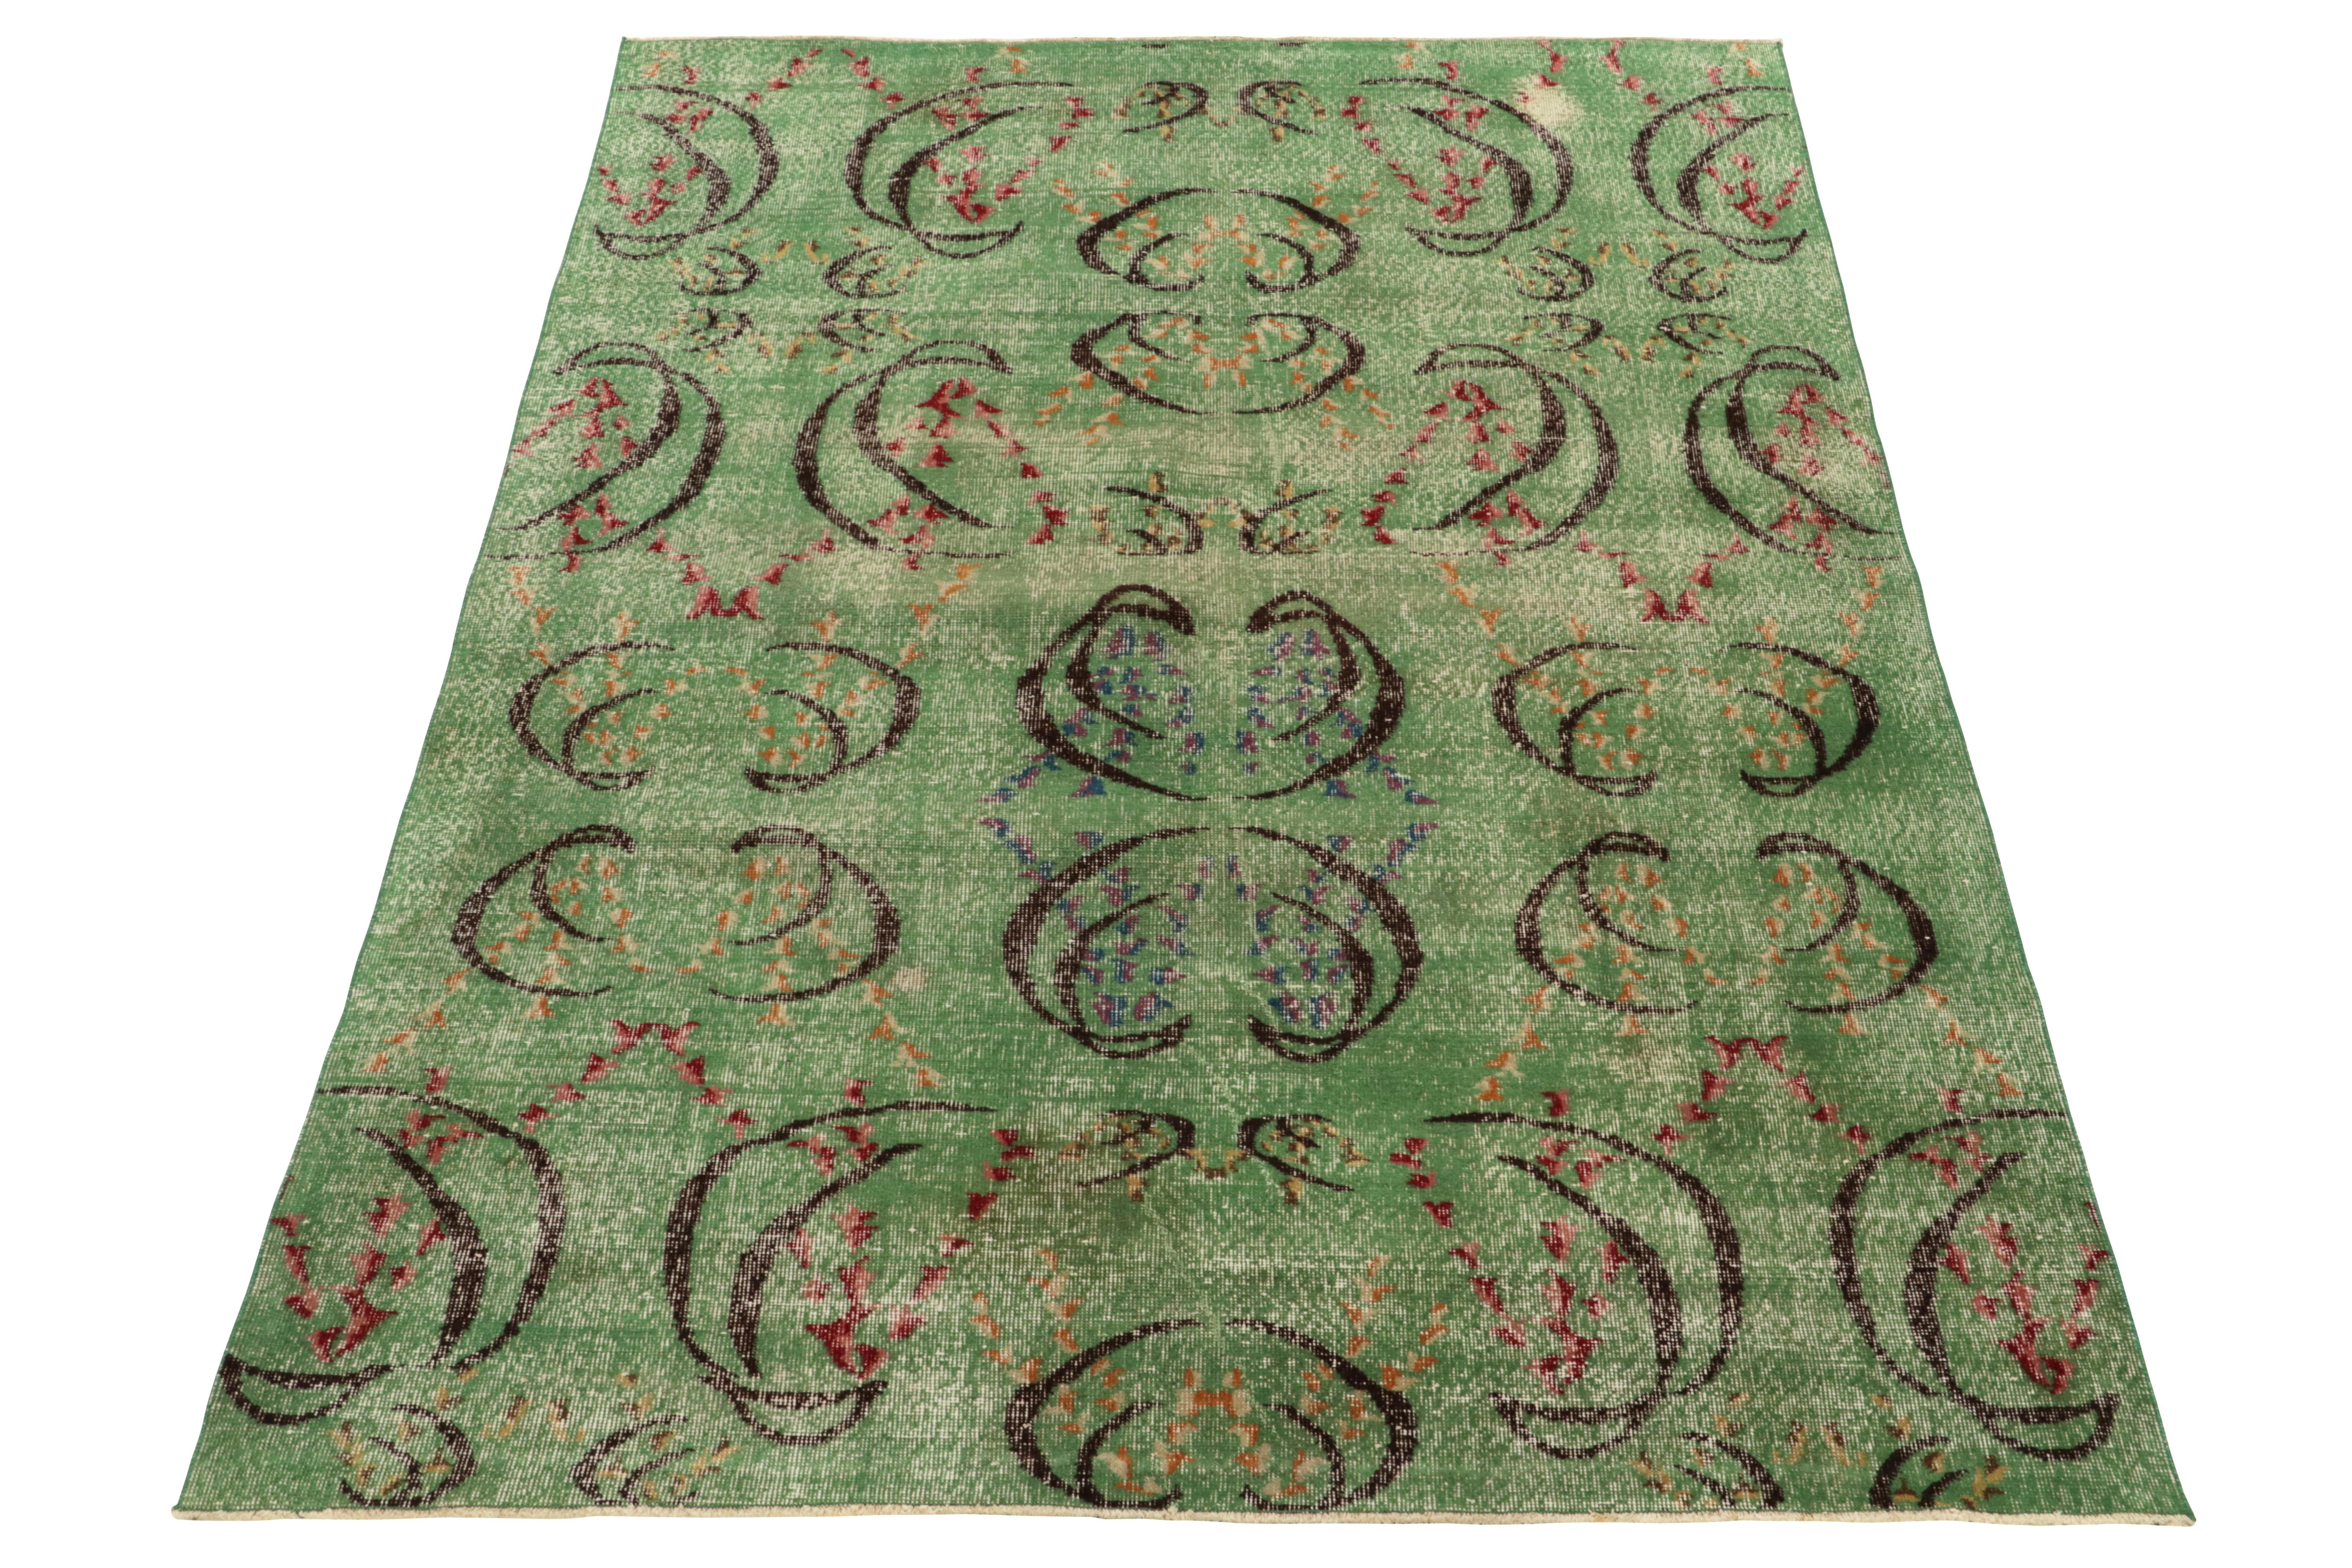 A vintage 6 x 8 distressed Art Deco rug, hand-knotted in wool circa 1960-1970. Joining Rug & Kilim’s Mid-Century Pasha Collection, commemorating a bold Turkish atelier of the period renowned for these low-sheared pile, distressed shabby-chic works.